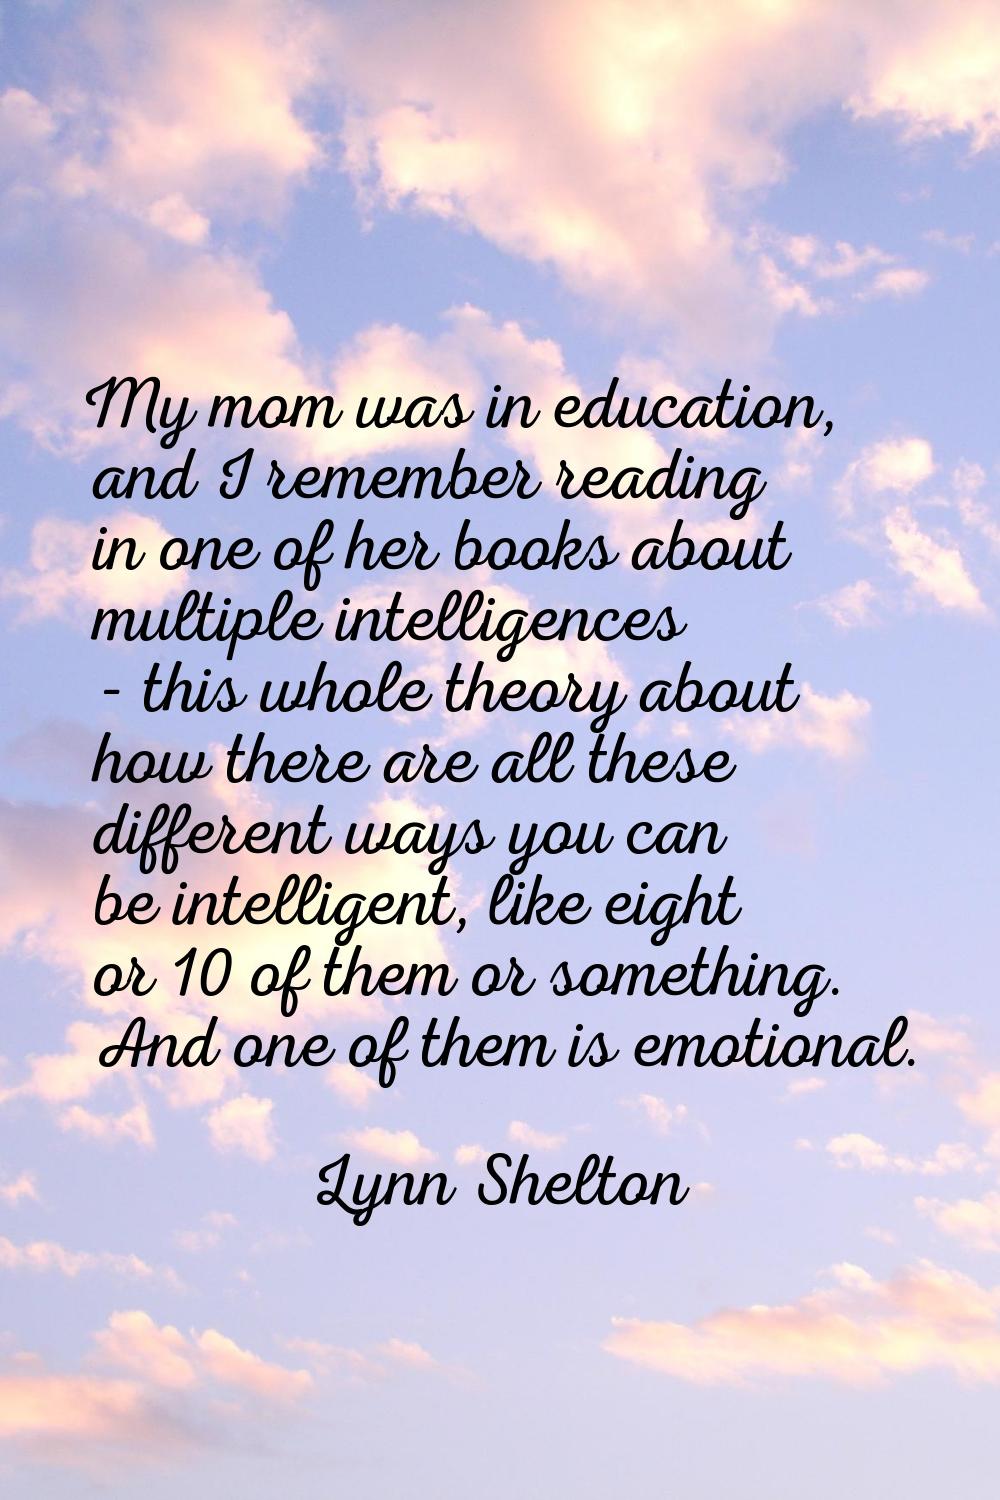 My mom was in education, and I remember reading in one of her books about multiple intelligences - 